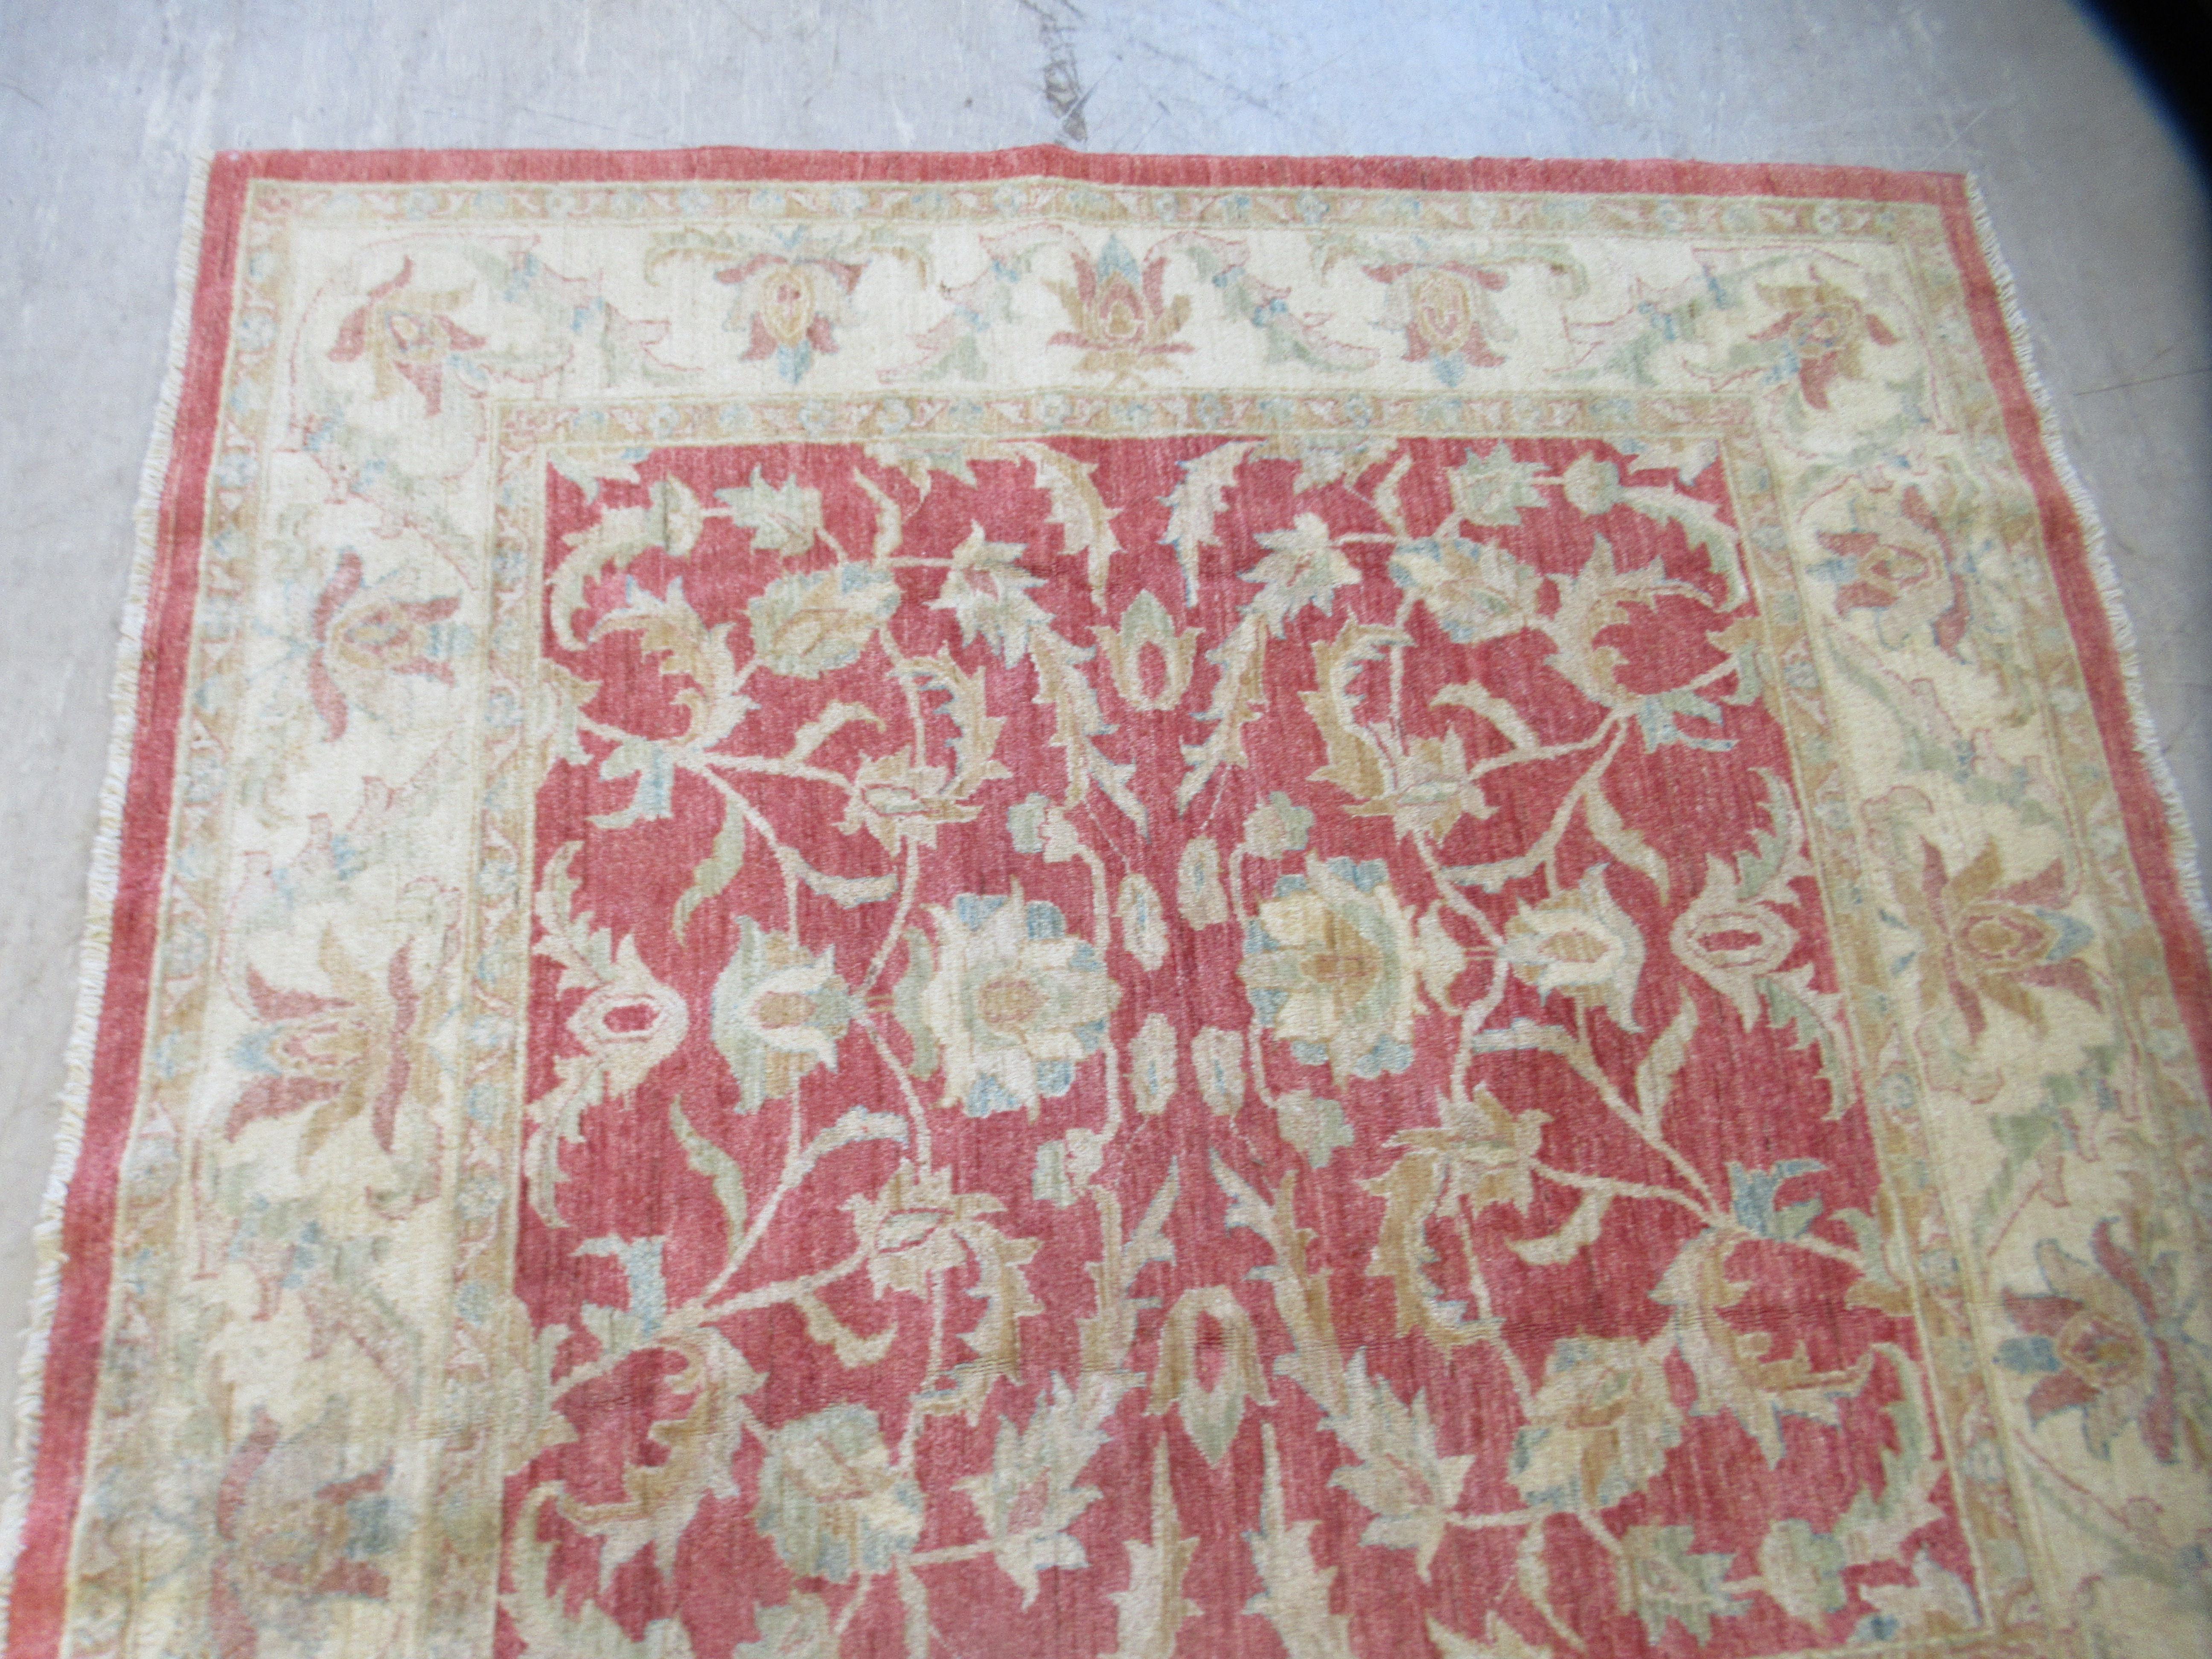 A Ziegler rug, decorated with foliate designs, on a red and cream coloured ground  79" x 78" - Image 3 of 6